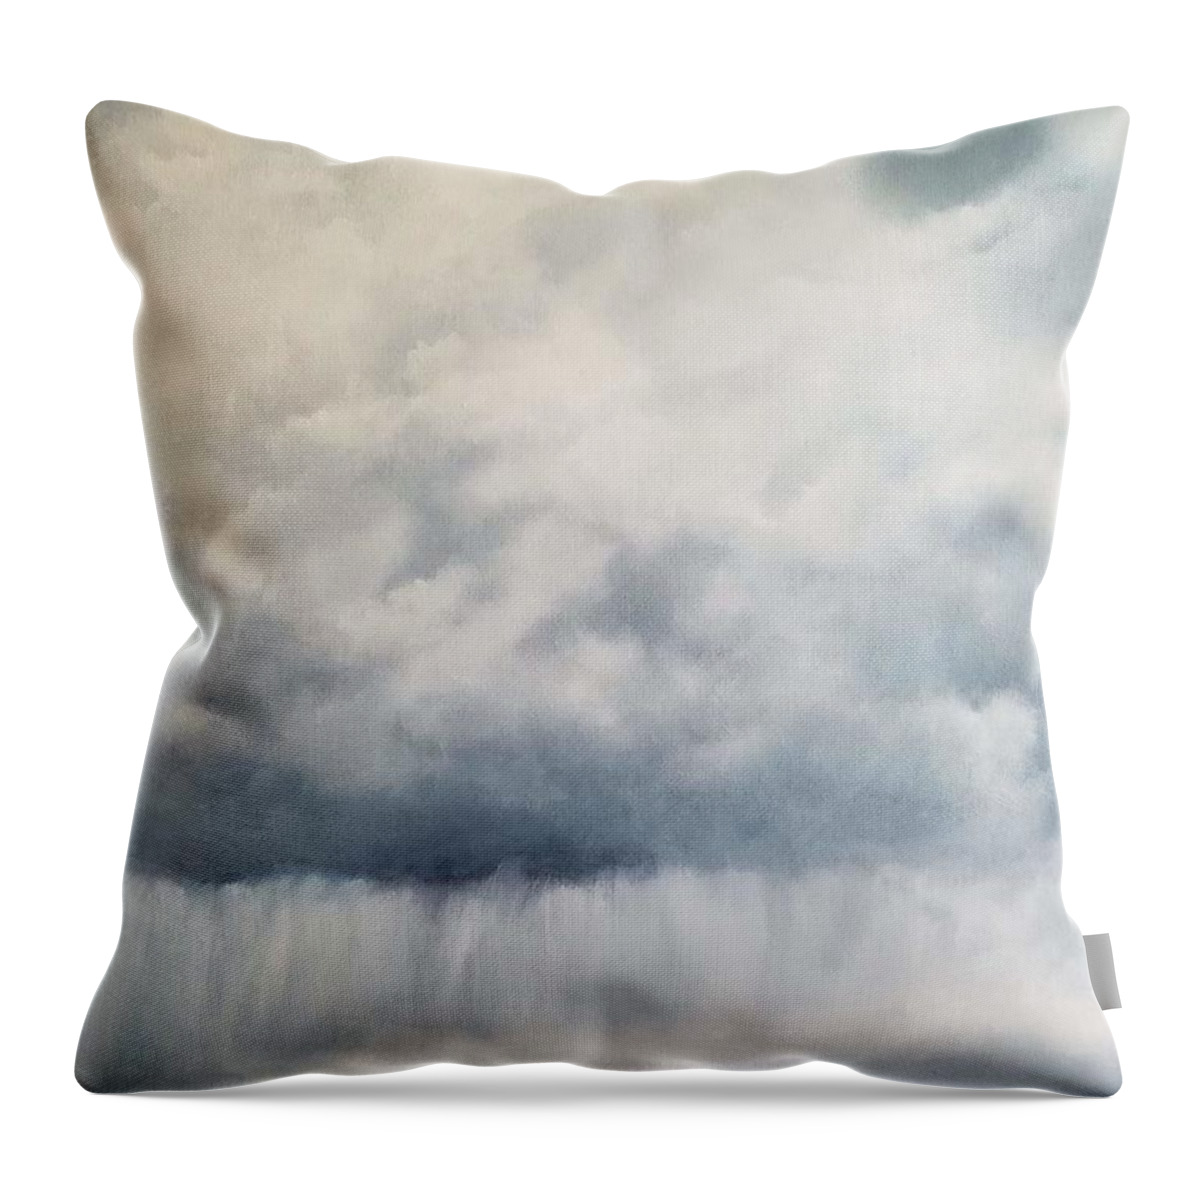  Throw Pillow featuring the painting Approaching Storm by Caroline Philp